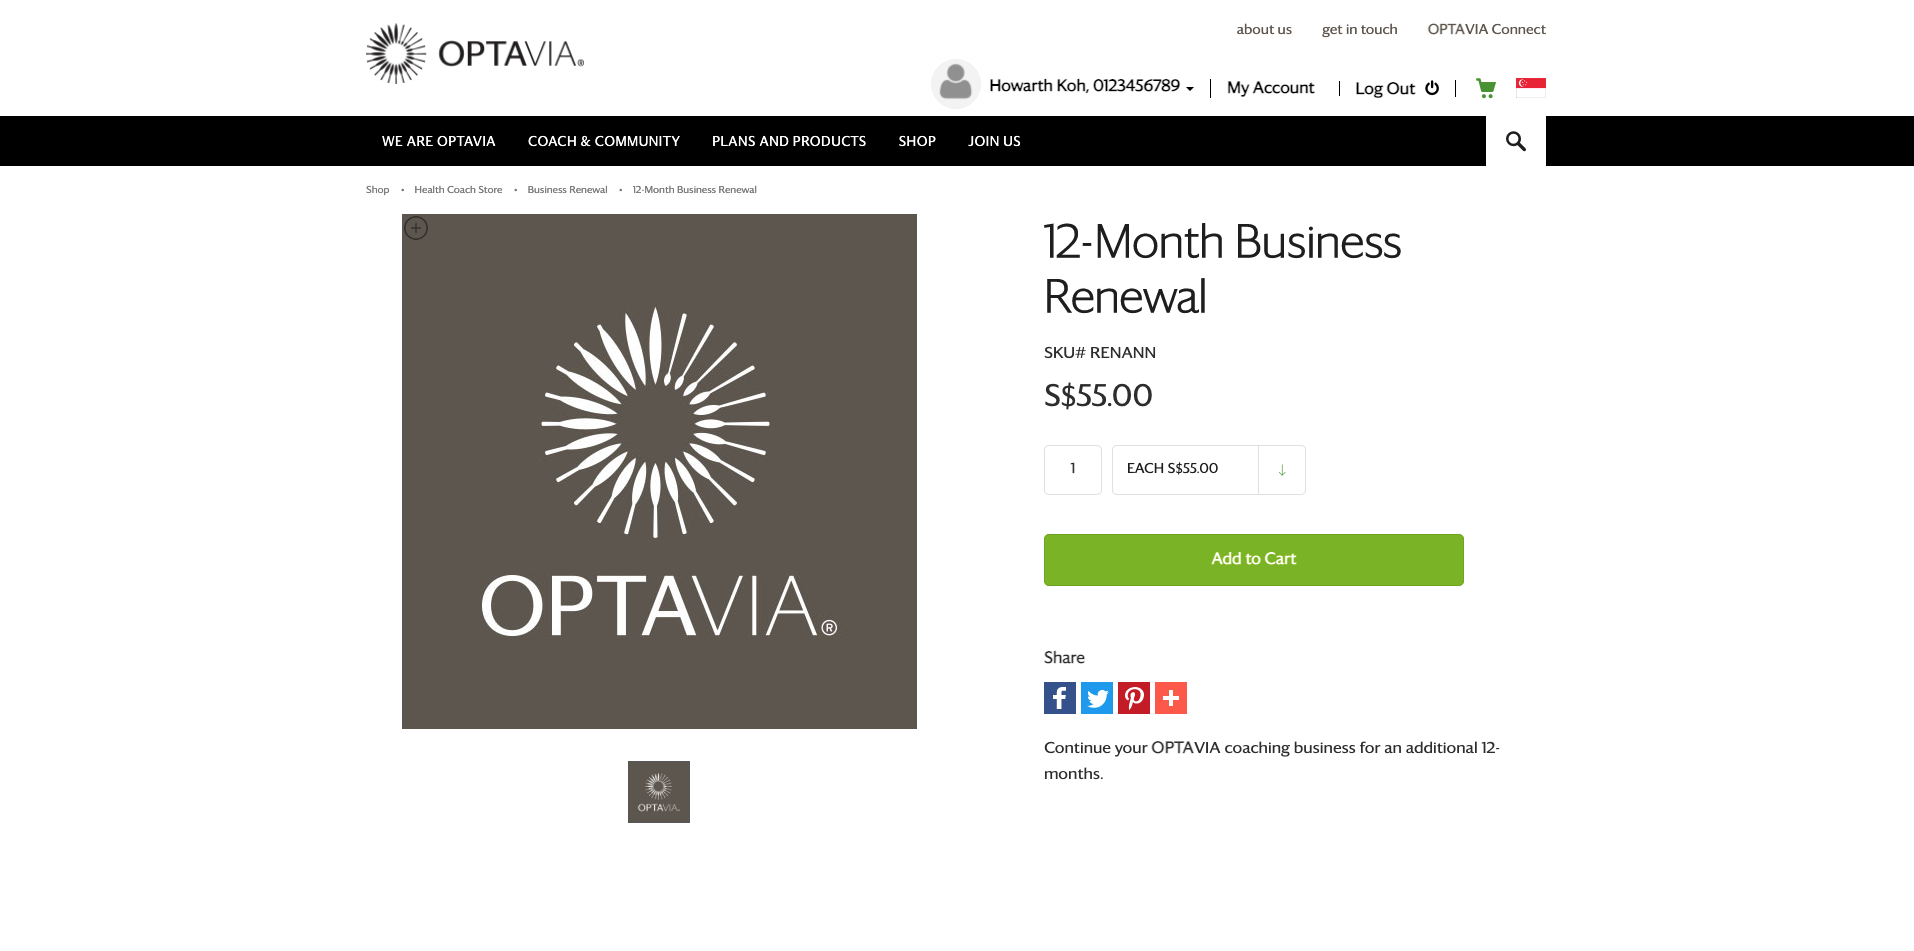 12-Month Business Renewal that needs to be added to cart.